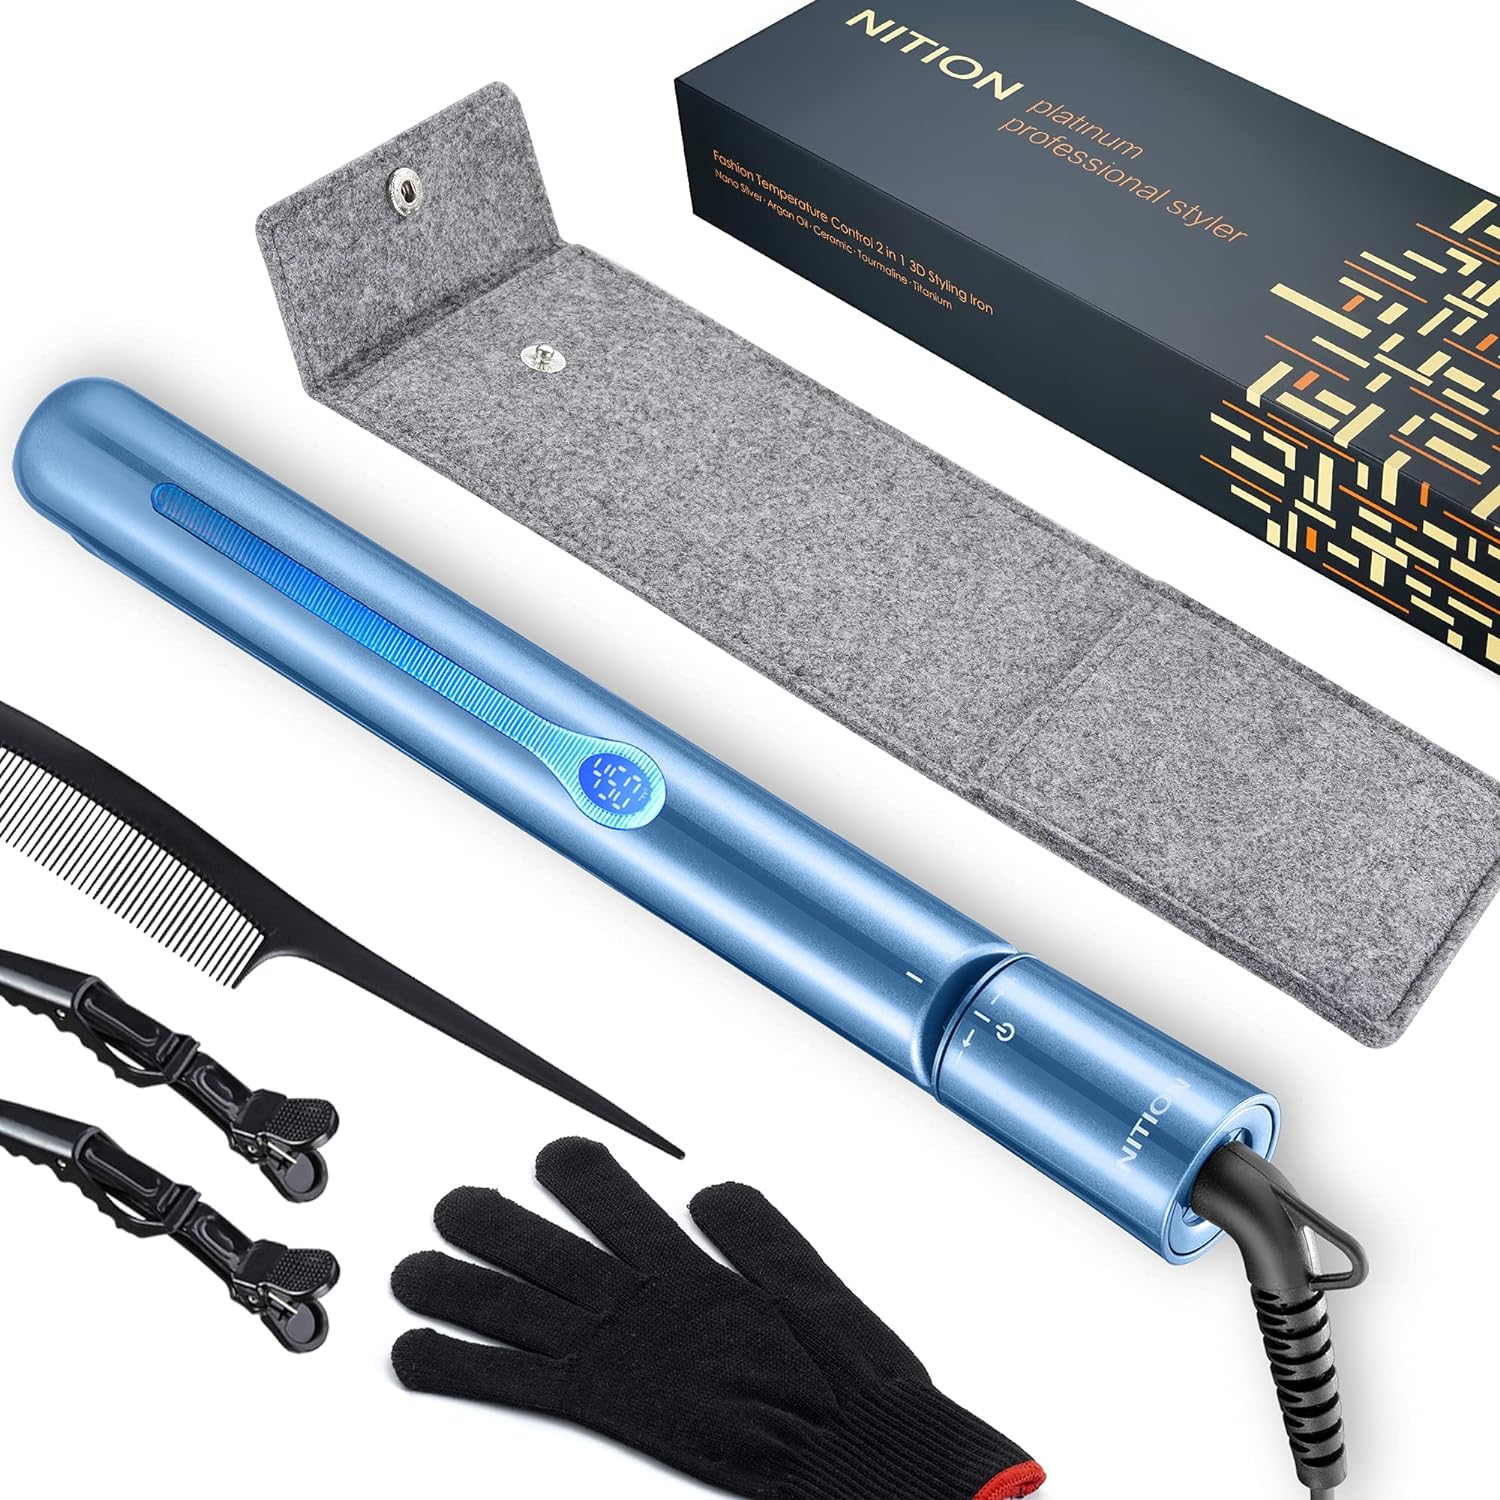 NITION Nano Titanium Hair Straightener 1" Heating Plate Straightening Flat Iron for Hair. LCD 265-450°F 6-Temps s Adjustable. 2-in-1 Hair Curling Iron Tools for All Hair Type. Blue